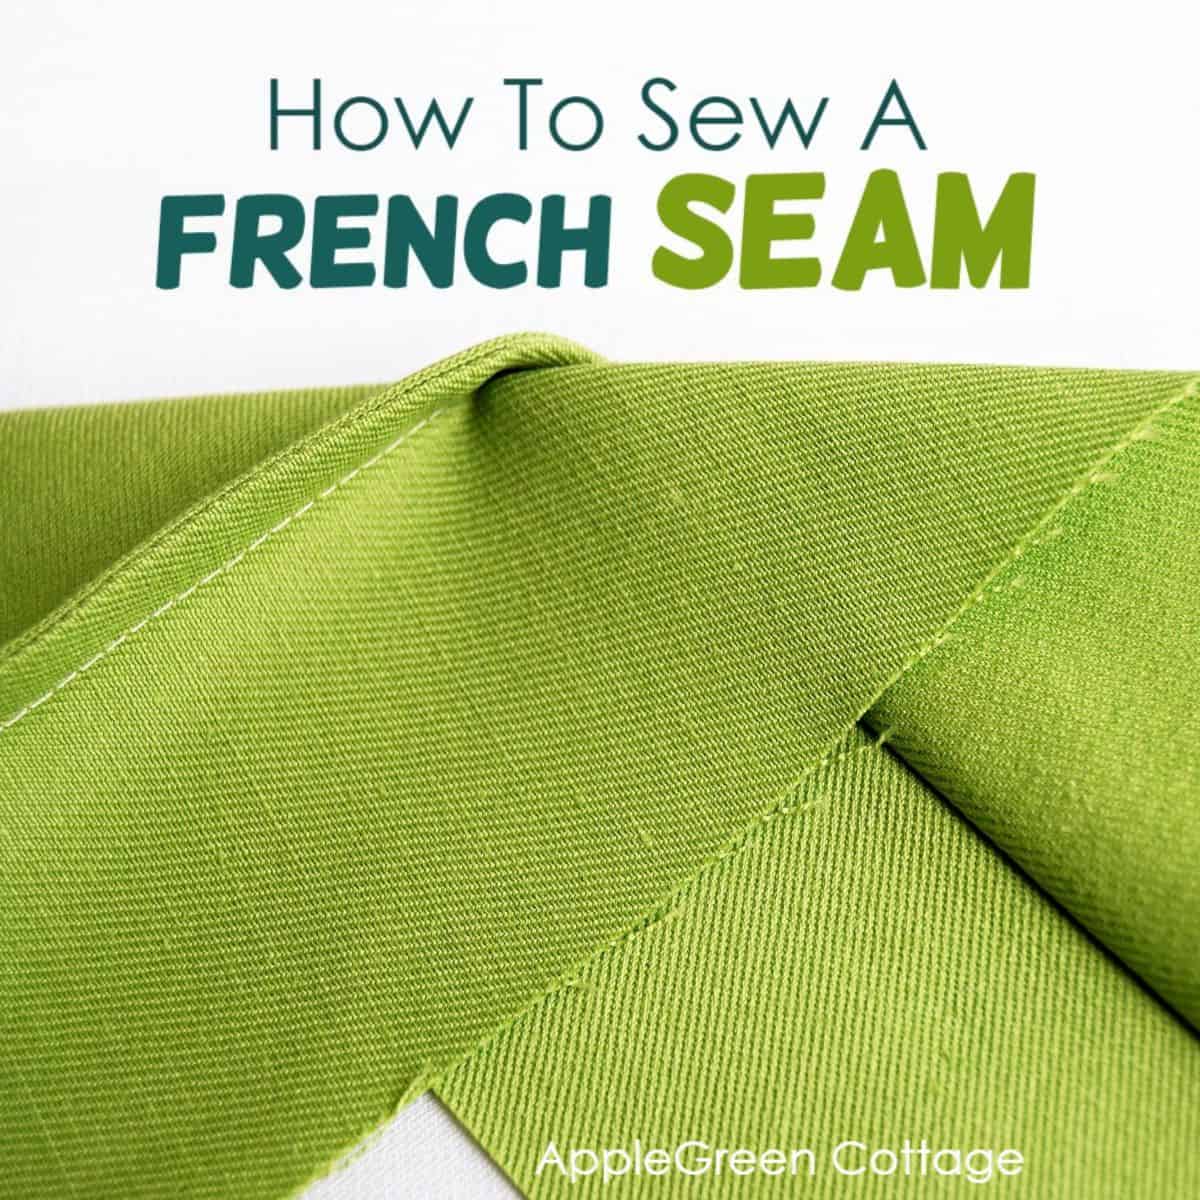 how to sew a french seam